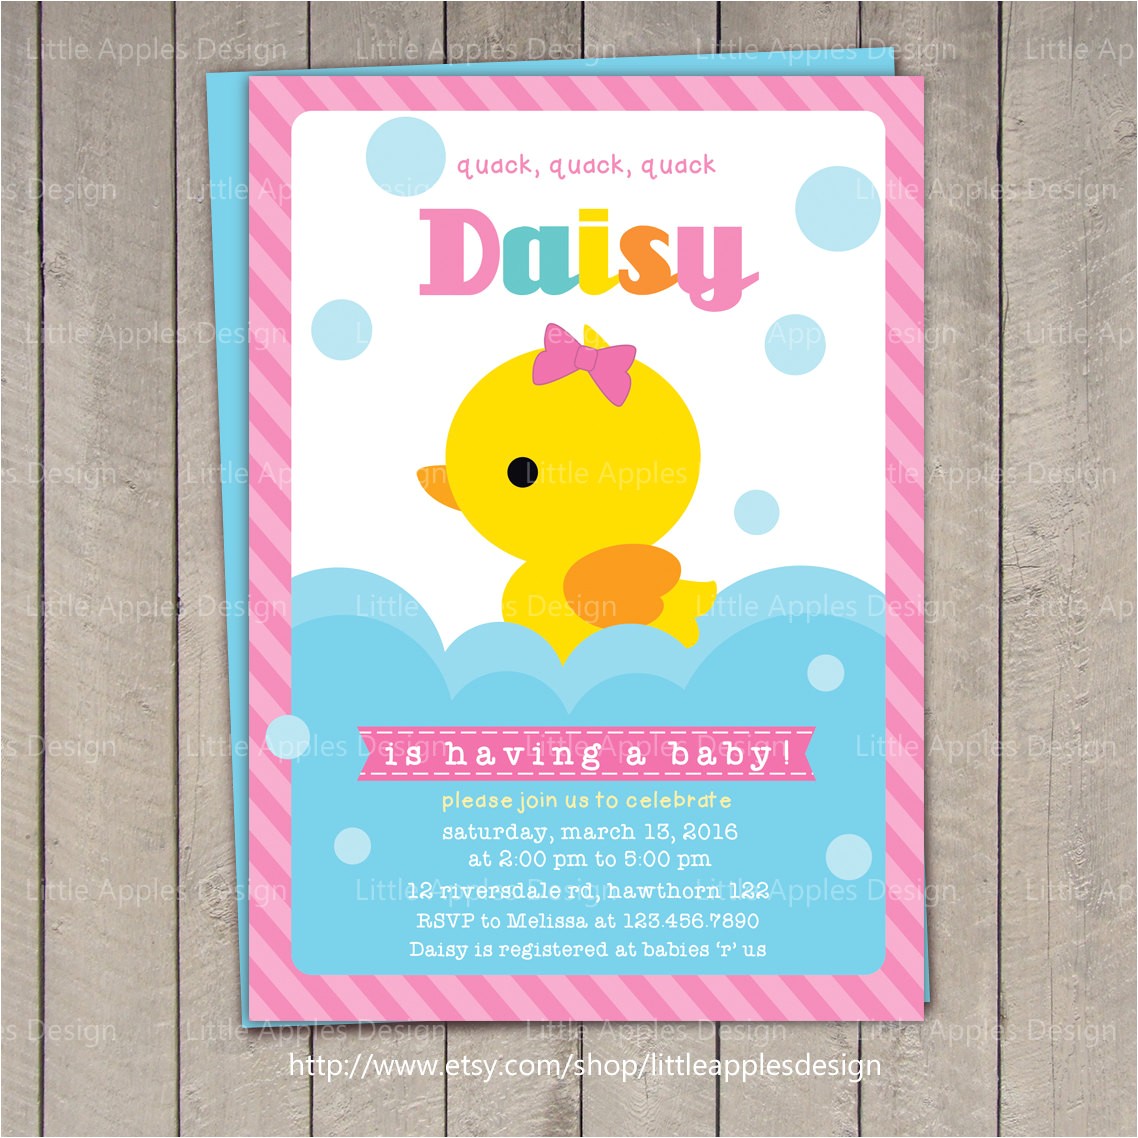 Baby Shower Invitations with Ducks Duck Baby Shower Invitation Rubber Duck Baby Shower